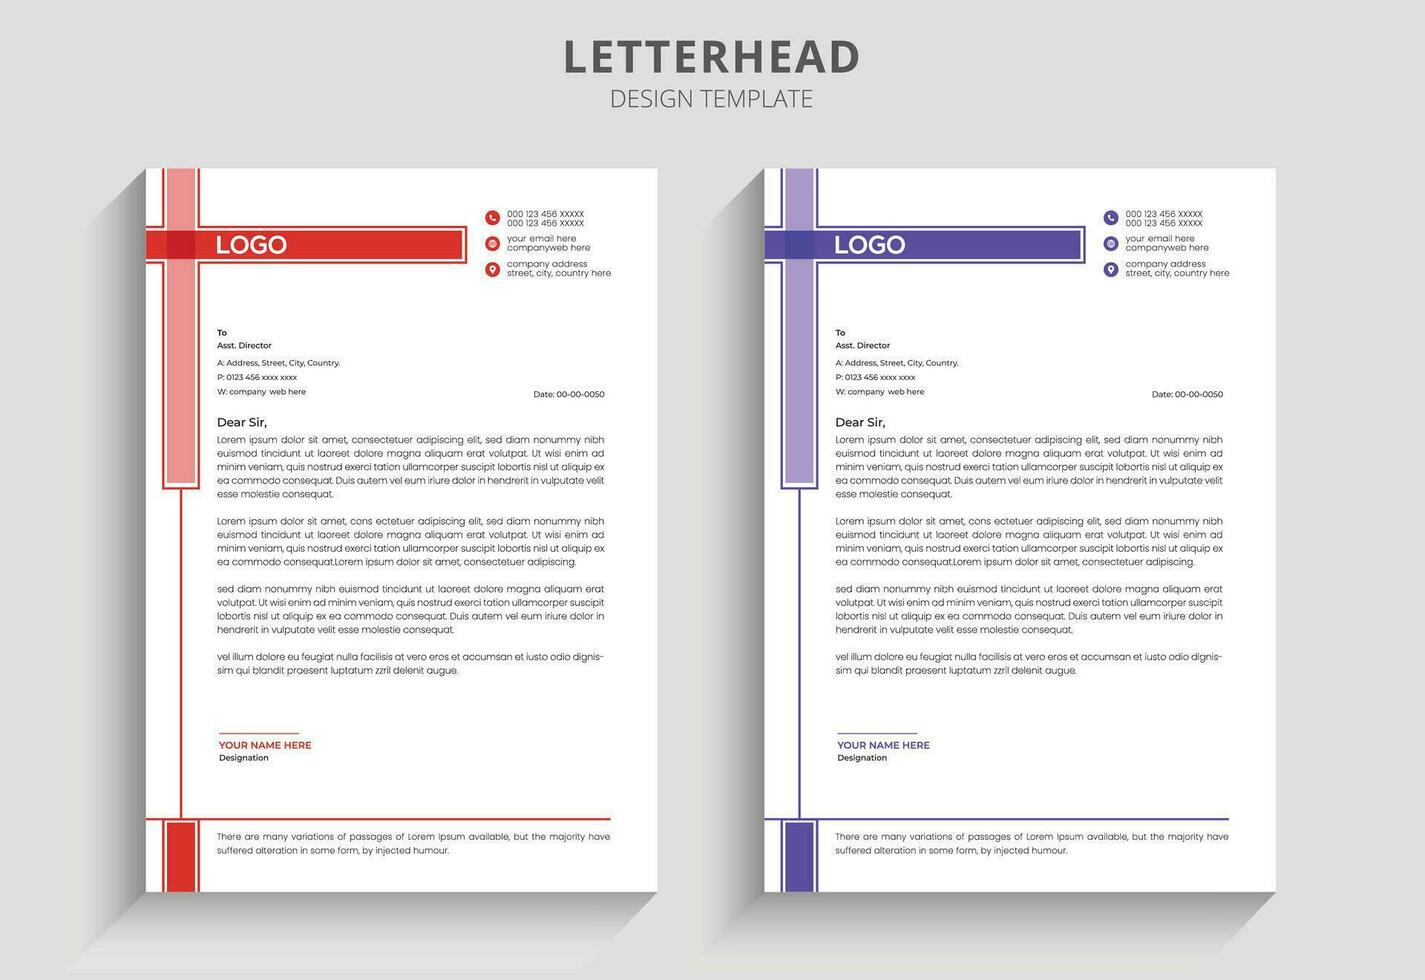 Professional corporate simple business letterhead design with Gradient luxury letterhead business document and Modern business company letterhead template, vector